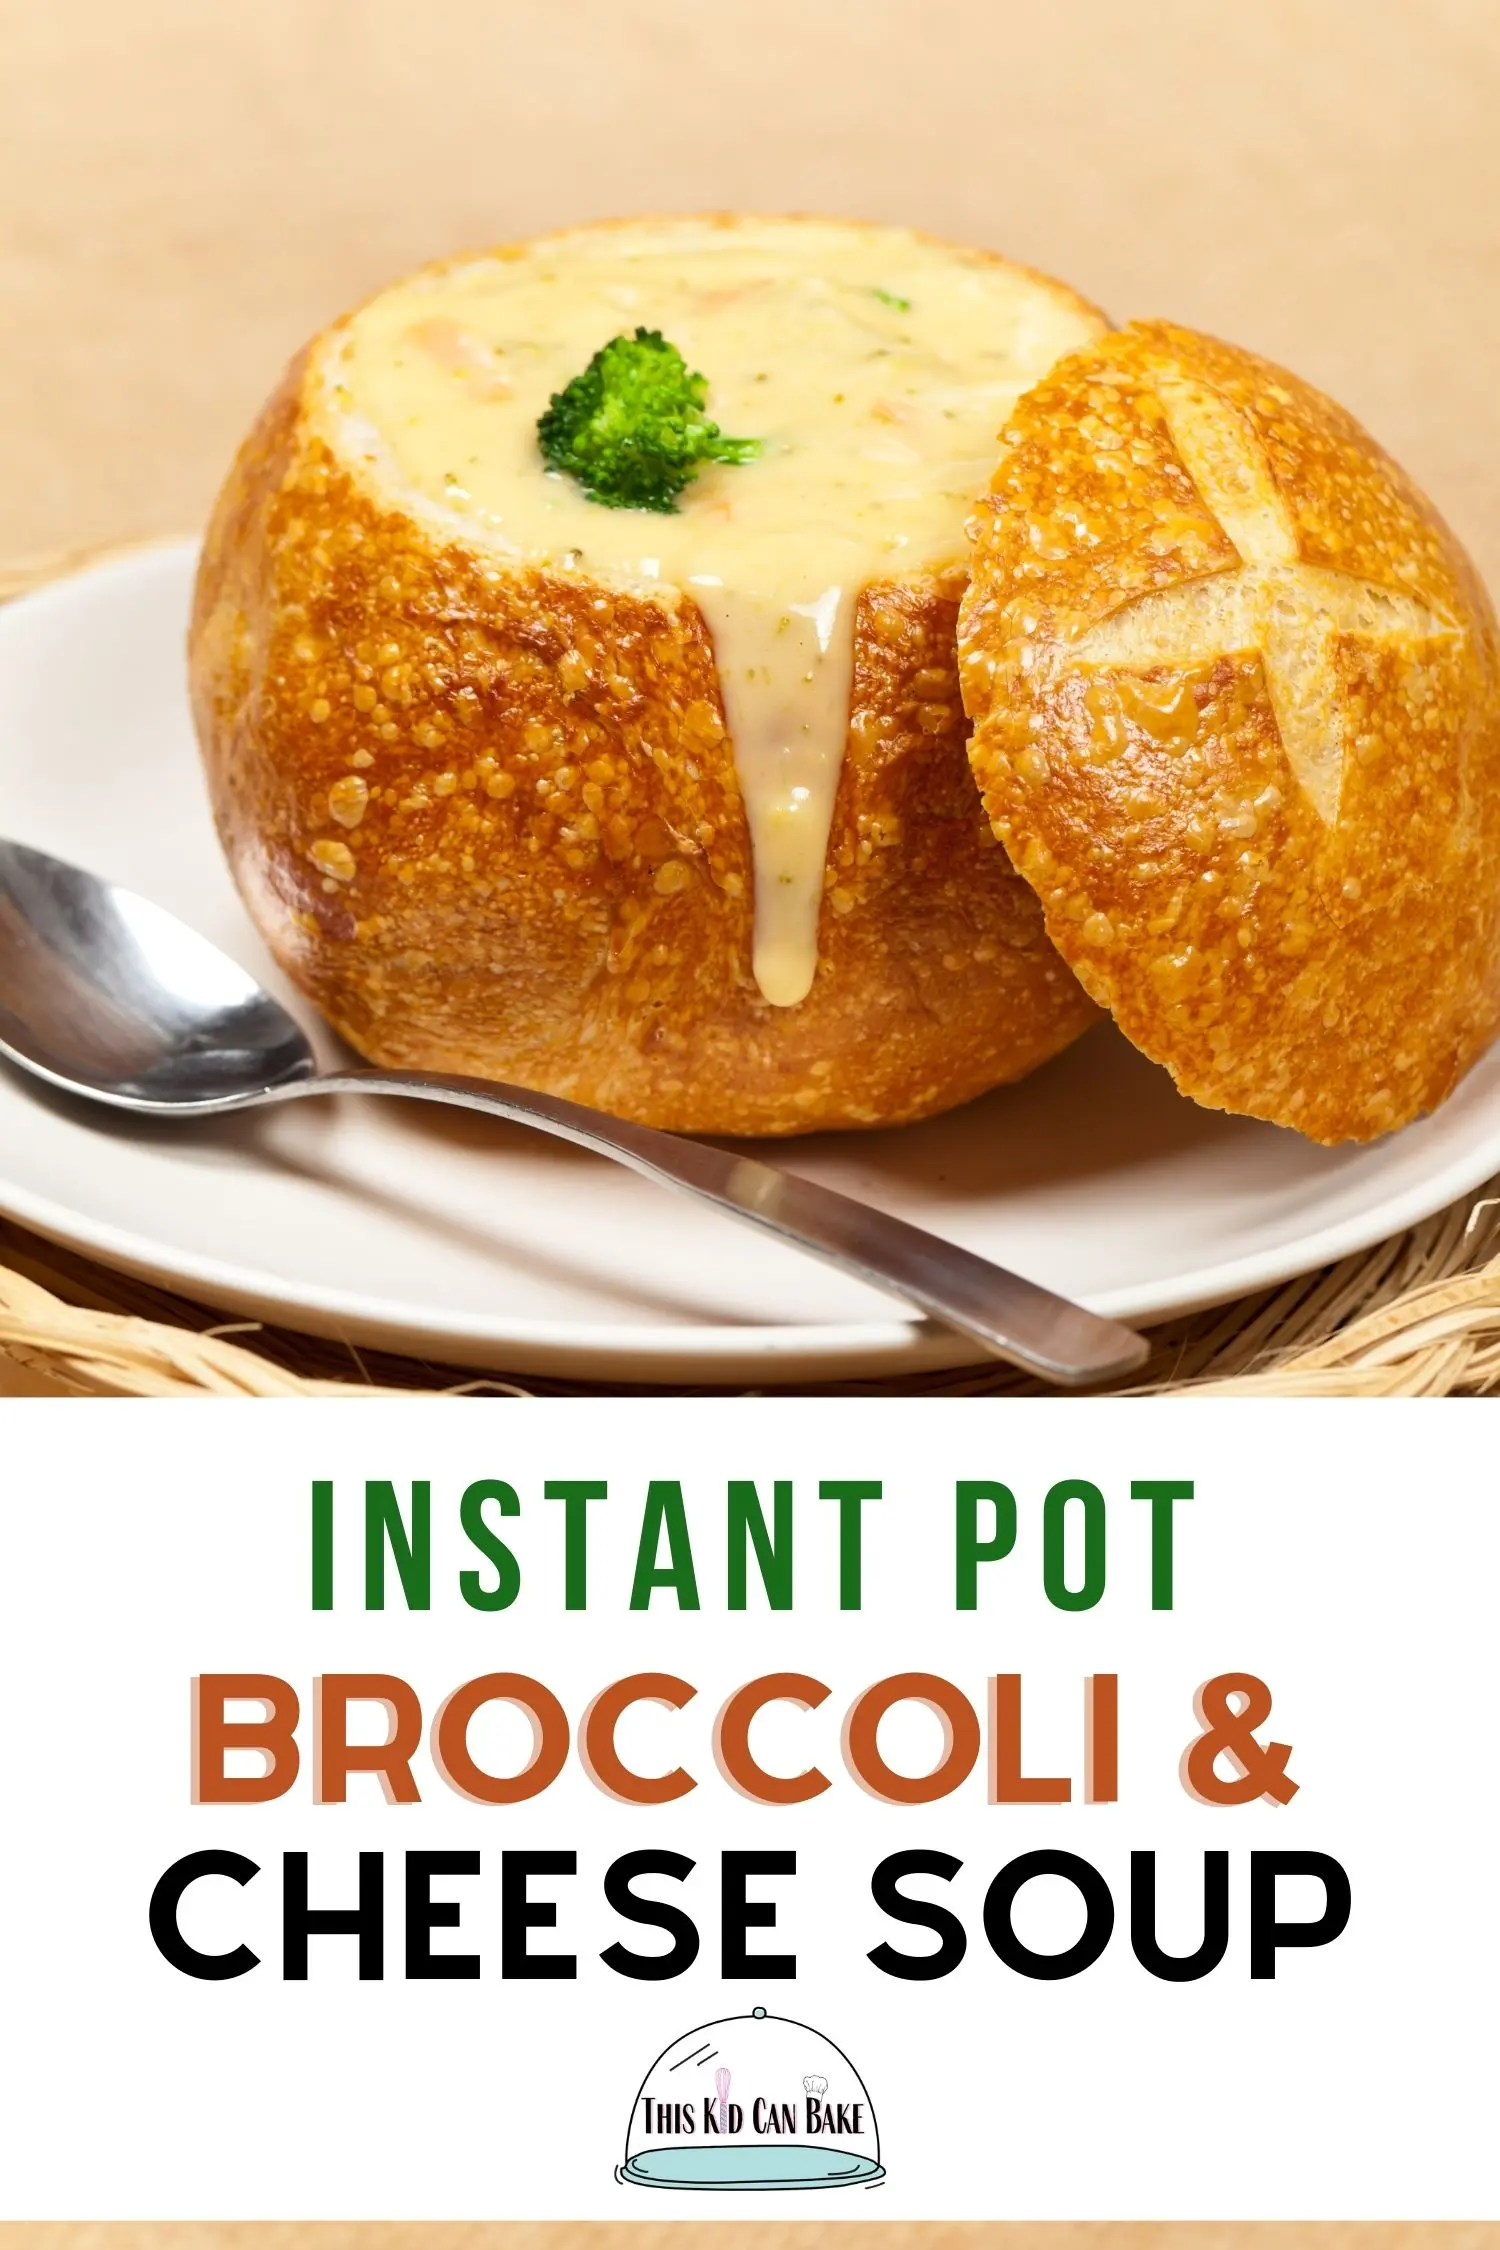 A picture of broccoli and cheese soup in a bread bowl with a white element box that has text that reads "how to make instant pot broccoli and cheese soup".